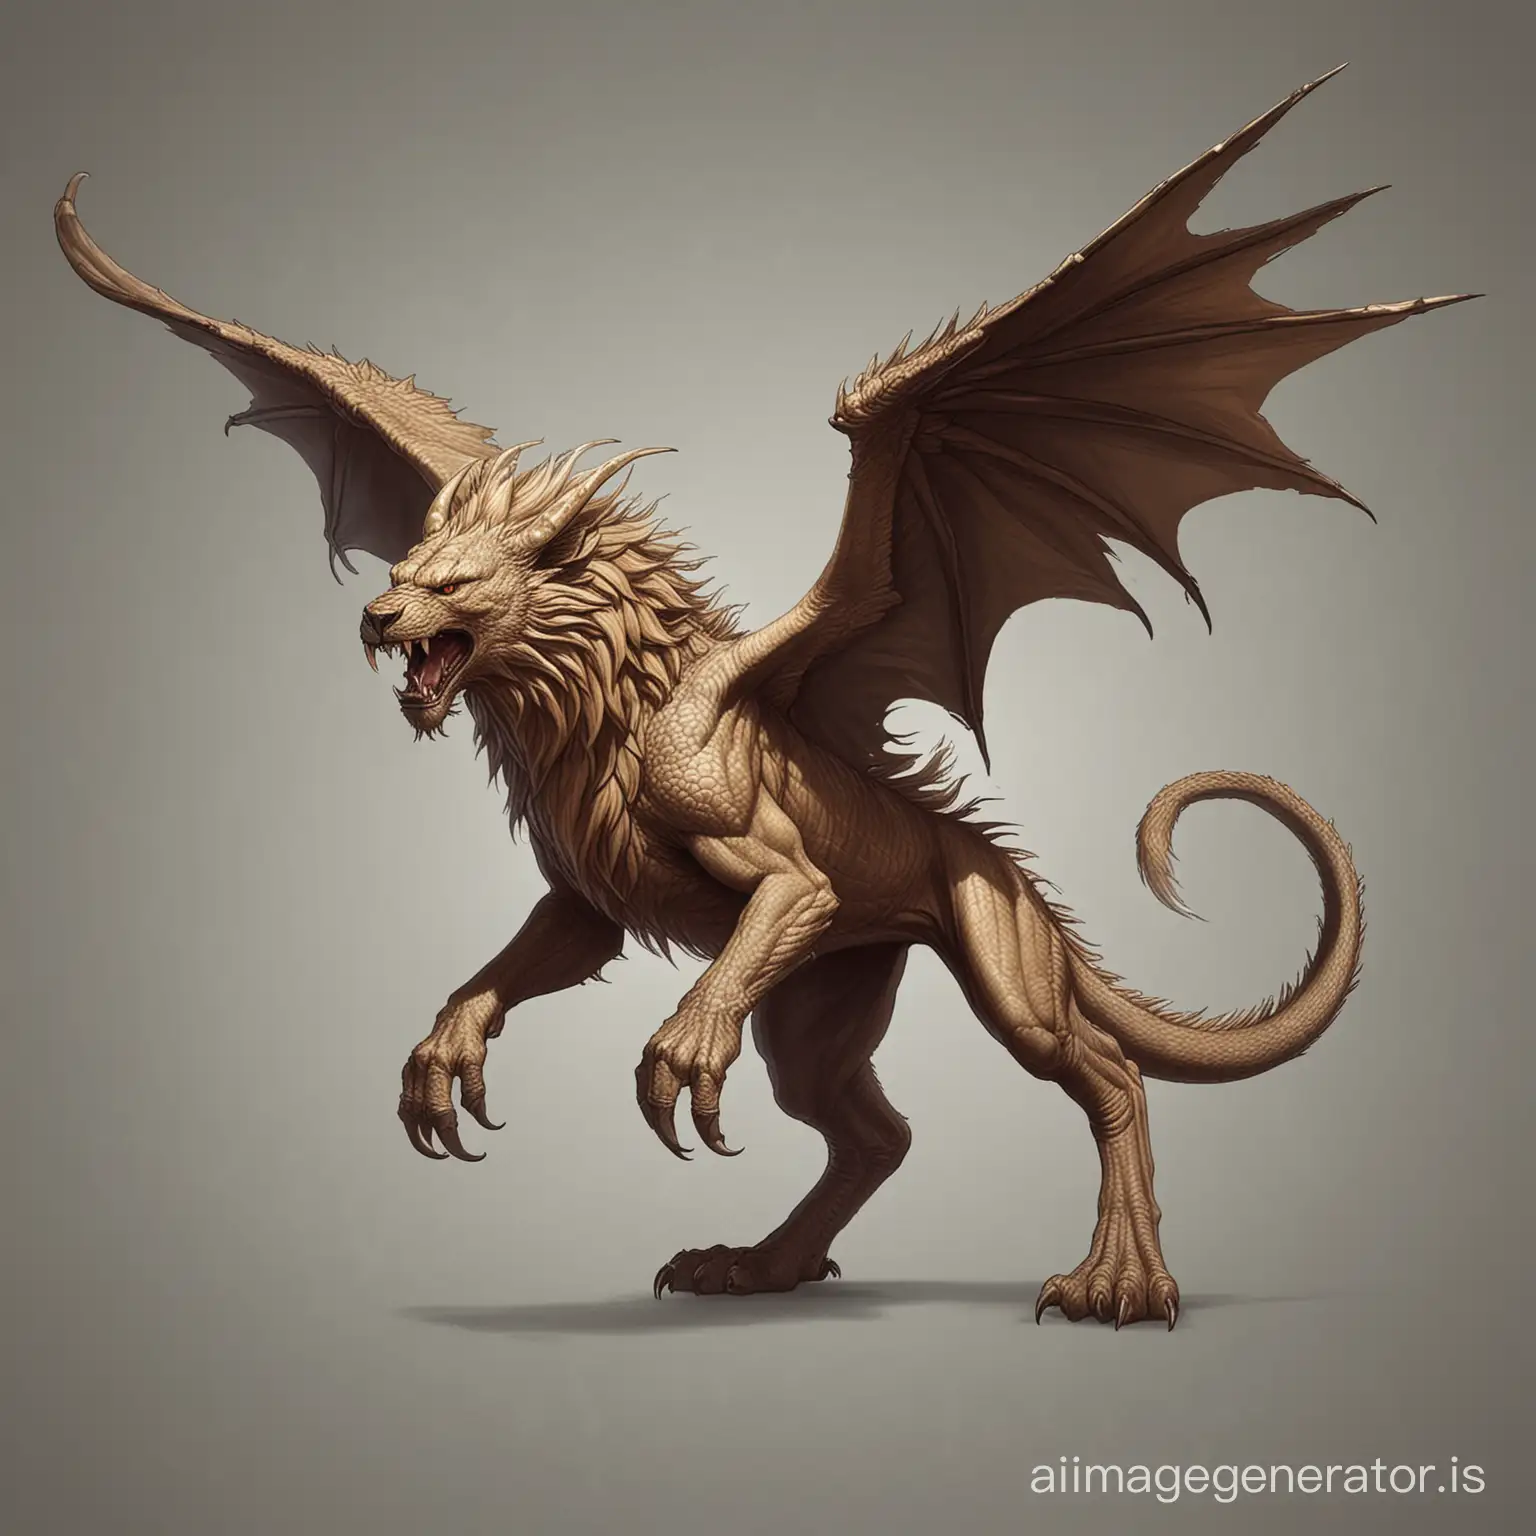 Draw me a creature with the following features: the body and head of a lion, the horns and fangs of a dragon and the wings of a wyvern. Its front legs are those of a bear, its back legs are eagle talons and it has a scorpion tail. I need the drawing to be in 2D with transparency.